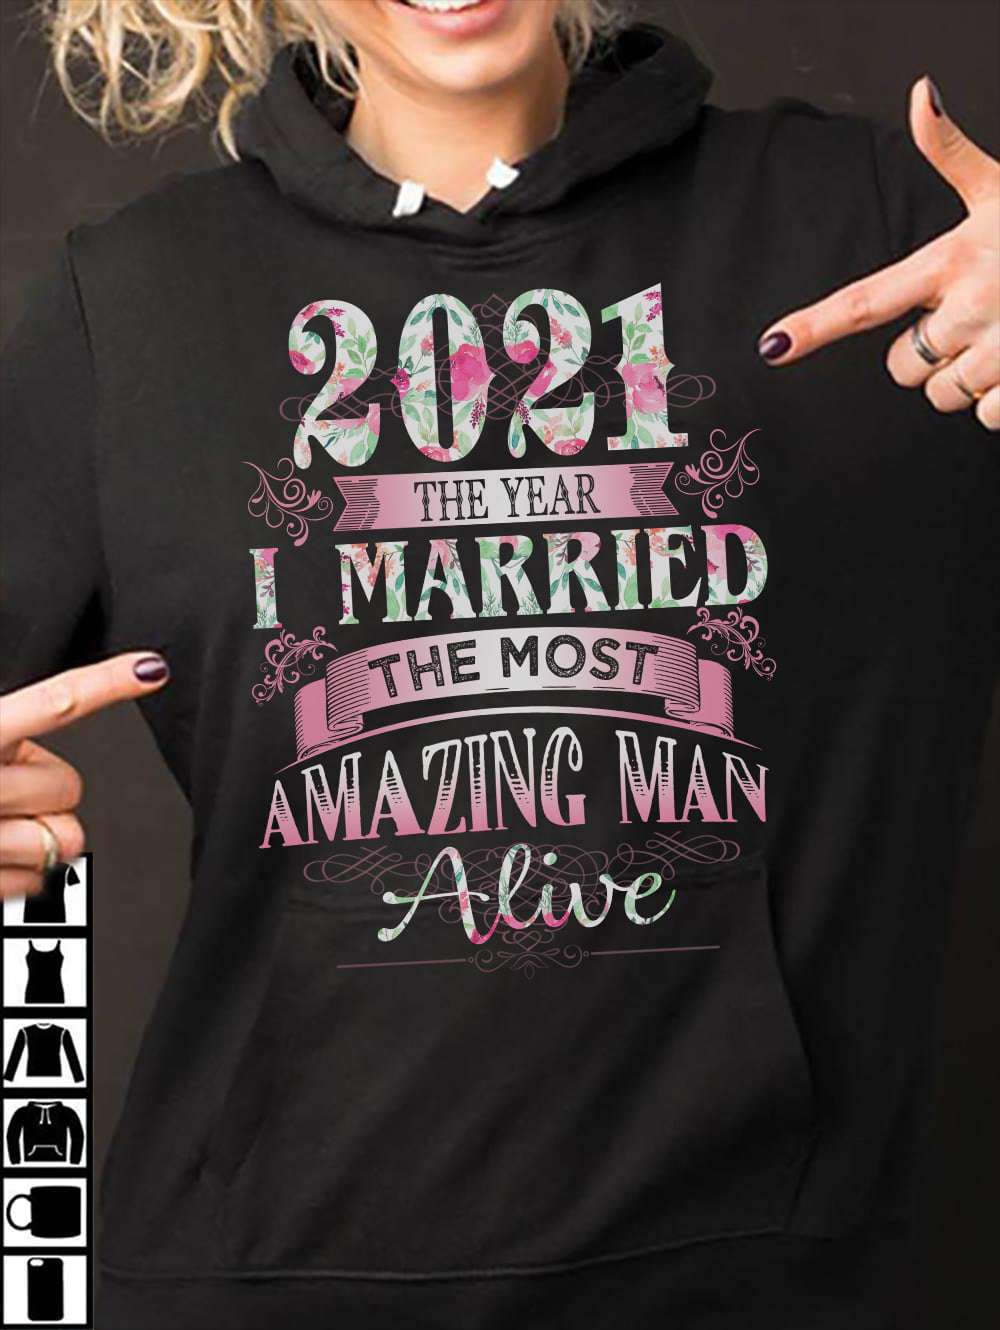 2021 the year I married the most amazing man alive - Husband and wife, the marriage